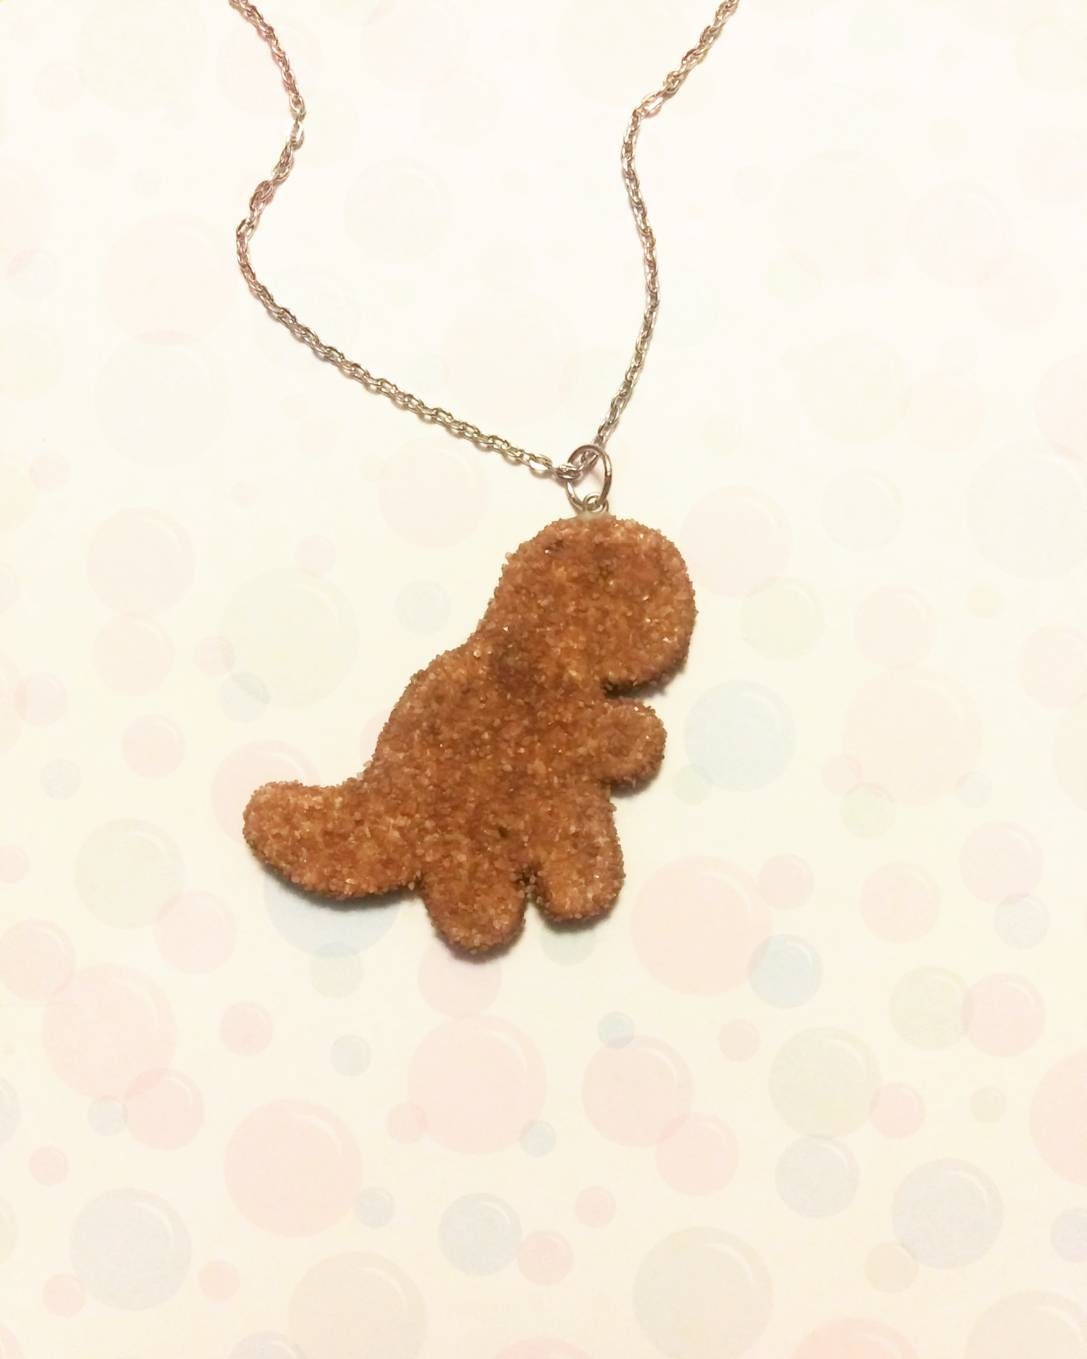 Fried Chicken Necklace Funny Necklace Novelty Necklace Jewelry for Women  Men - Walmart.com